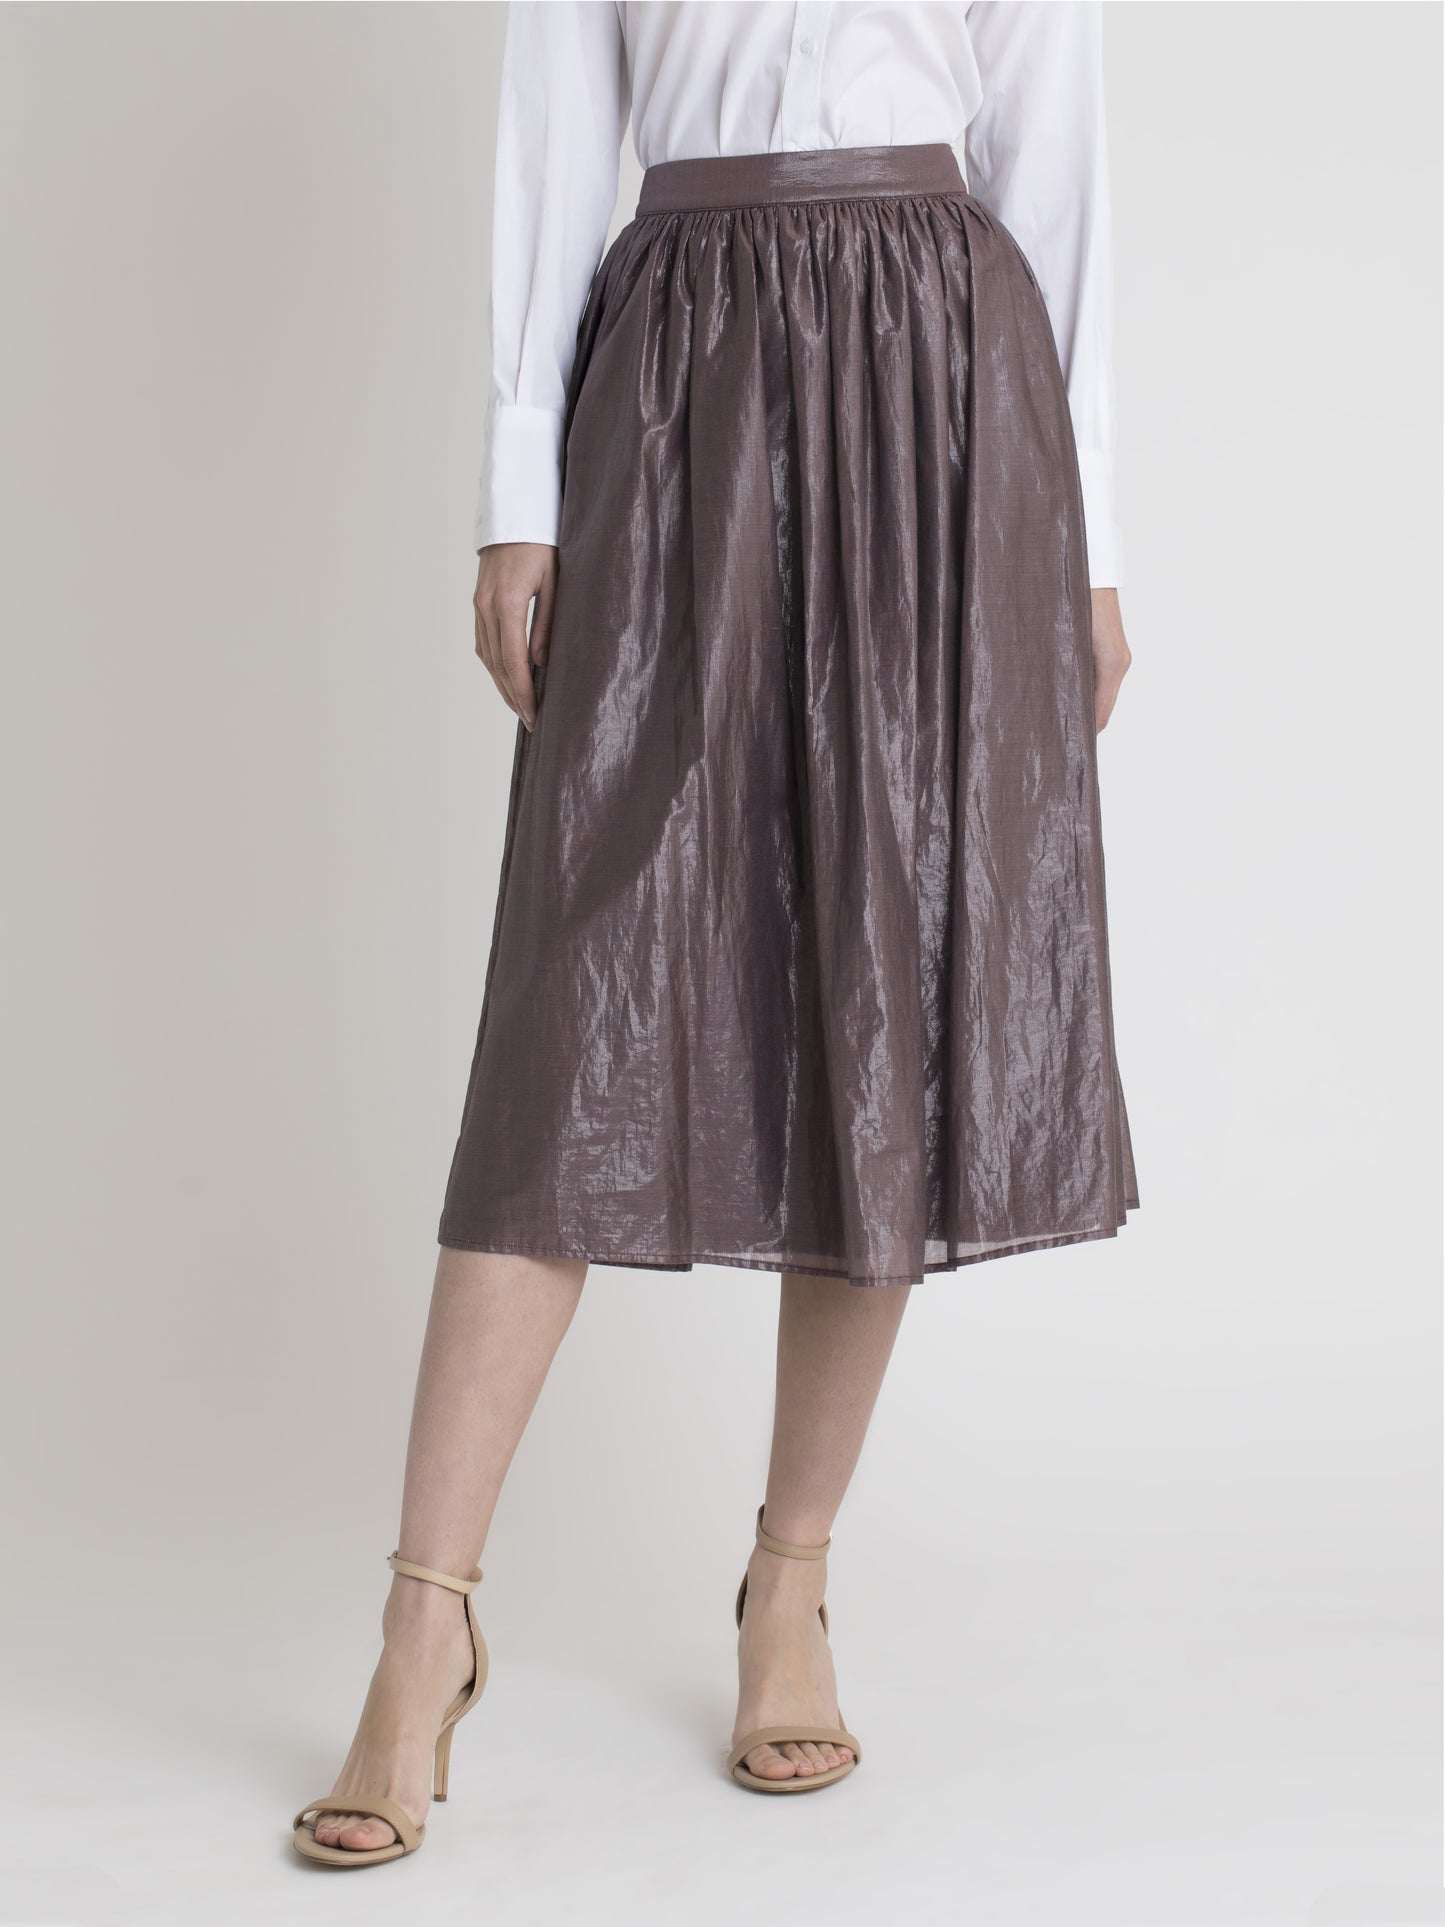 Lower body front view of a female model wearing a white dress shirt, nude high heel sandals, and a below the knee glossy earth color gathered skirt from the RÉZO women's collection.